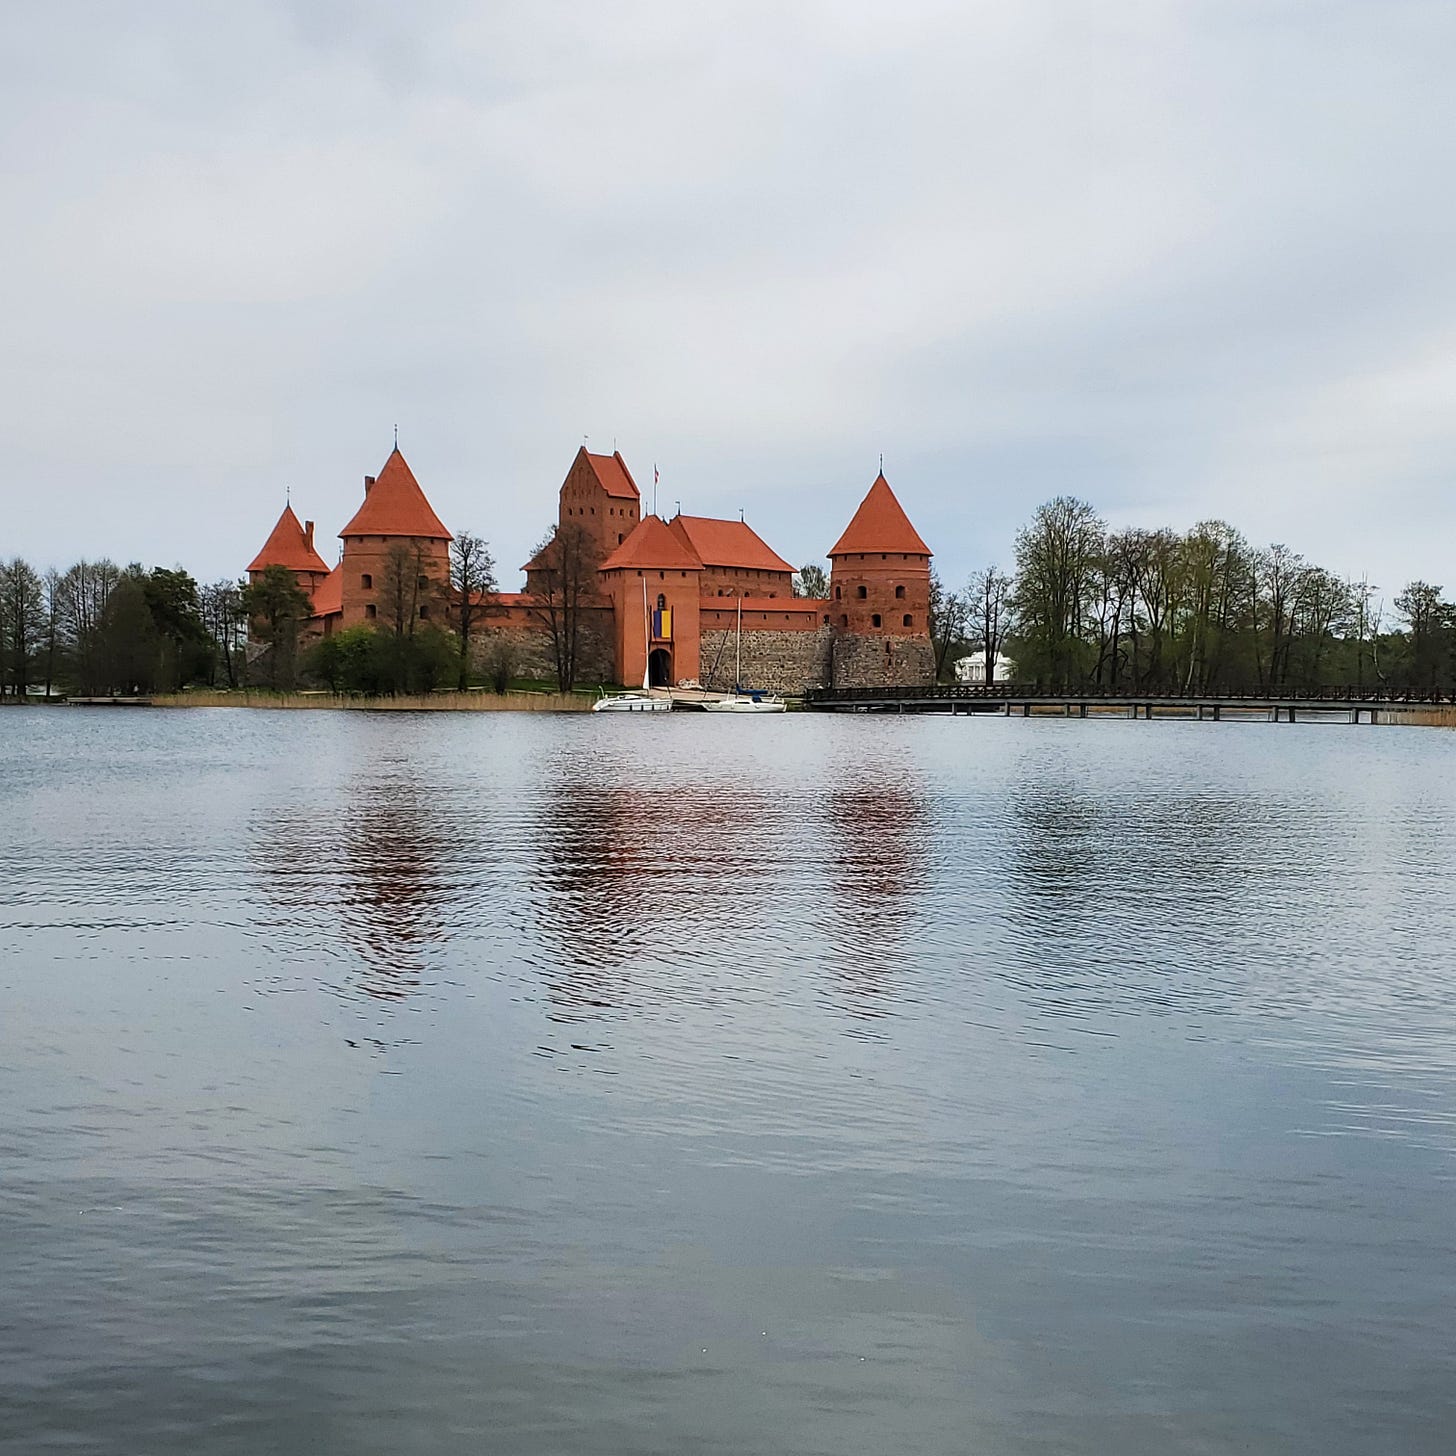 A restored medieval castle on a lake. 